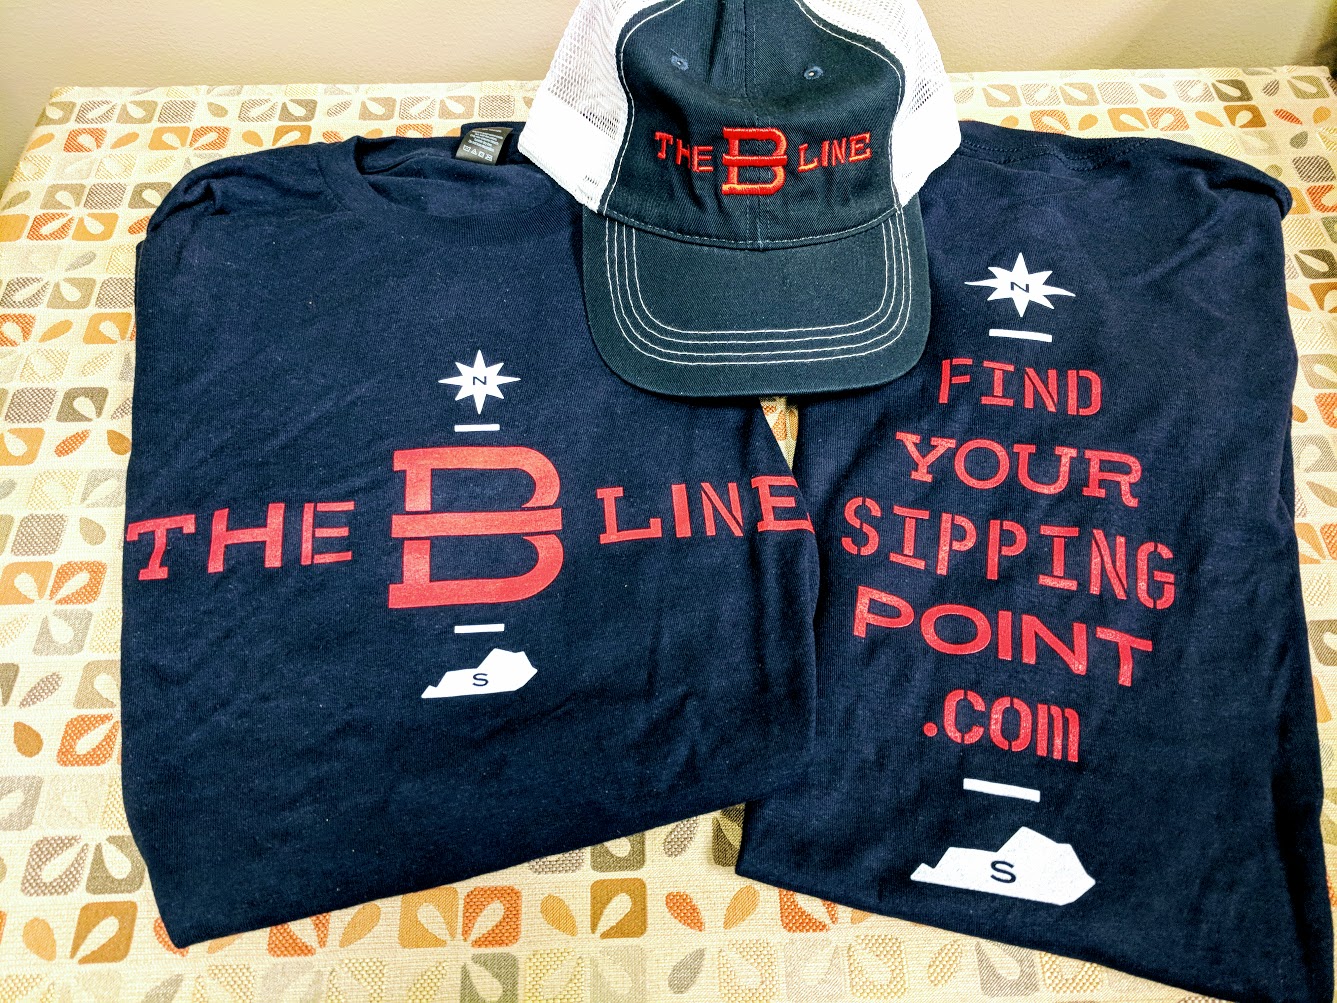 Some of the free bourbon swag people get for completing the B-Line Bourbon trail in NKY. Blue, white and red t-shirts and a hat that have the words The B-Line, Find Your Sipping Point